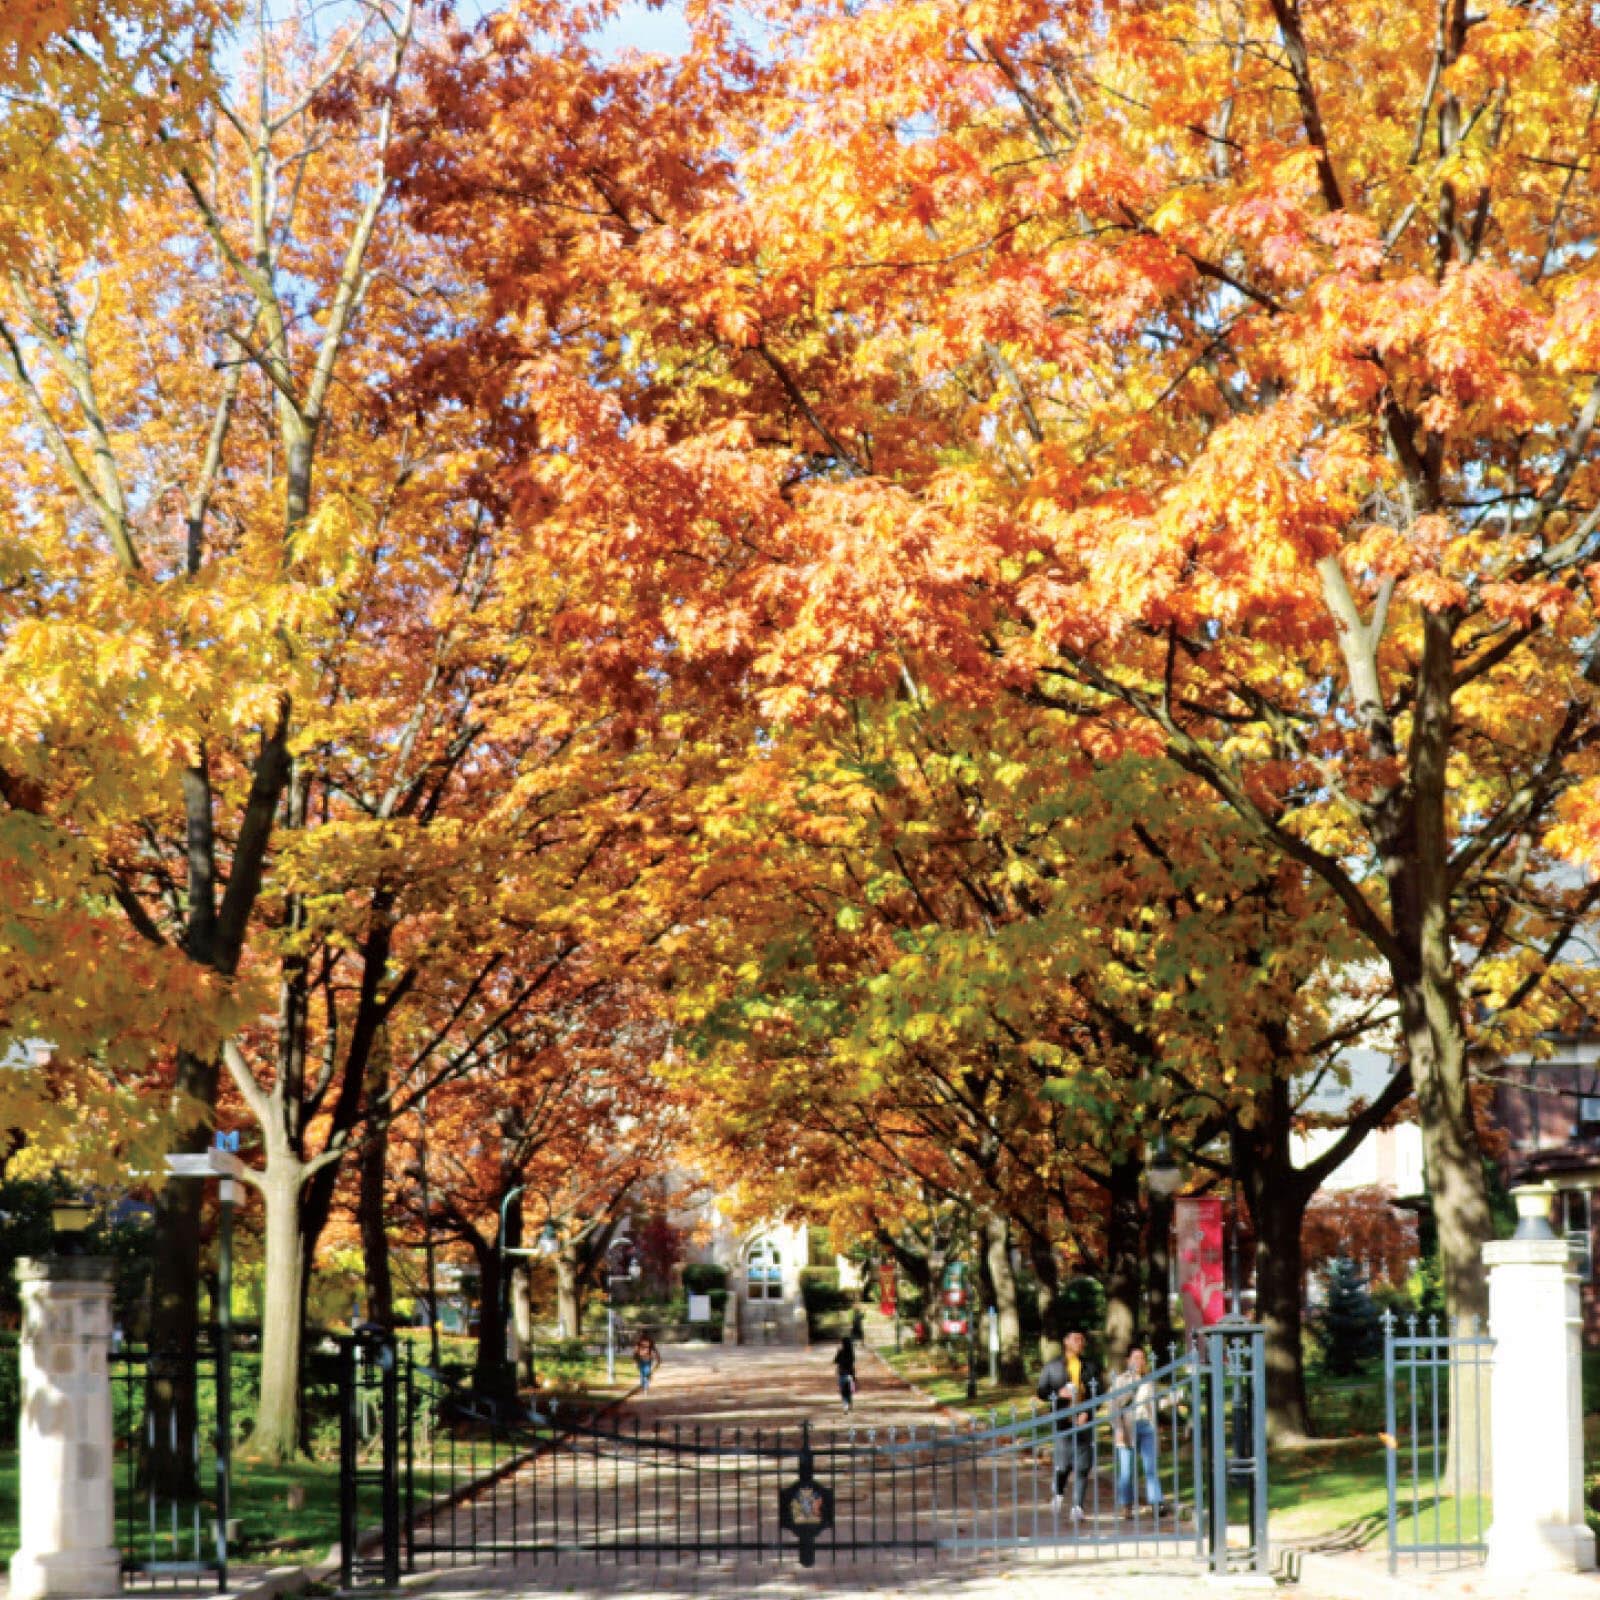 St. Michael's College: Elmsley Lane in the autumn.